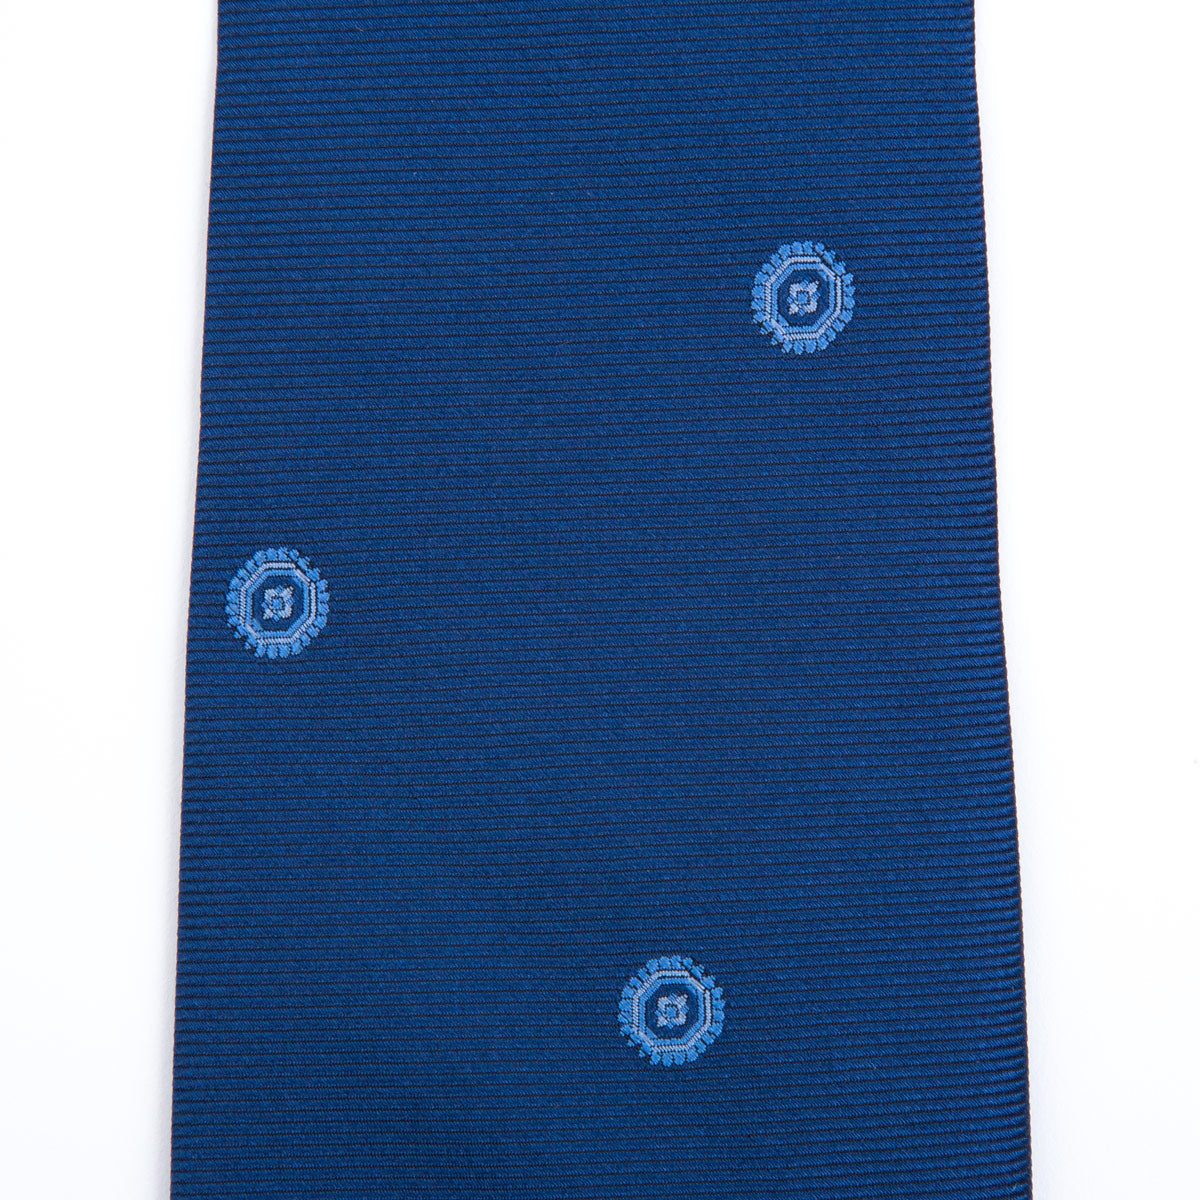 French blue speckled tie